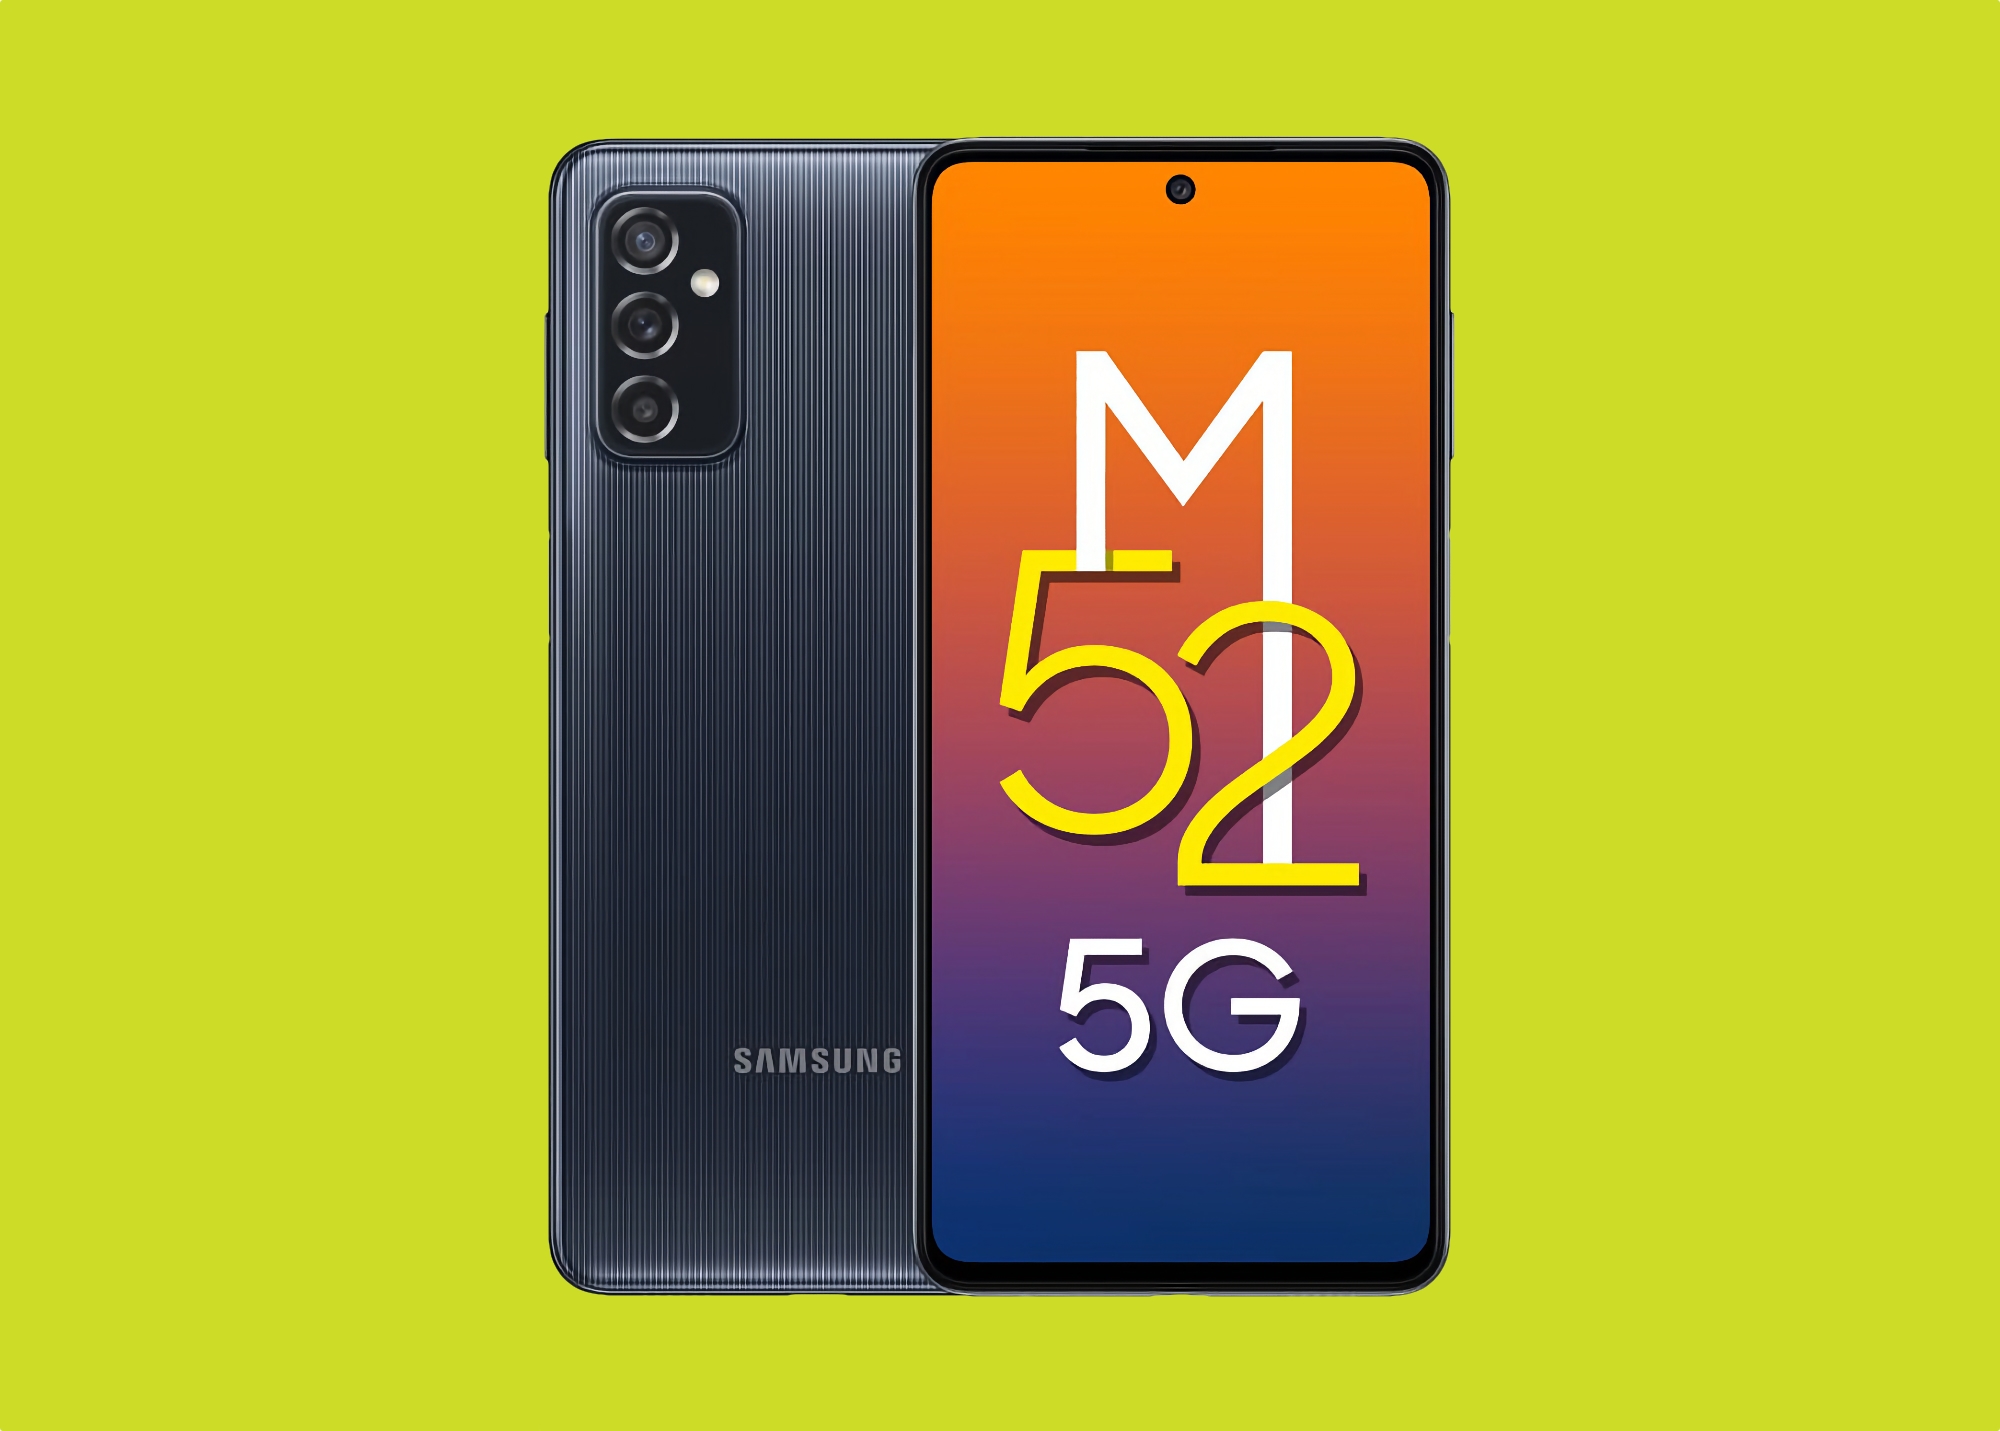 Samsung released Android 13 for the Galaxy M52 5G: What's new and when to expect the firmware